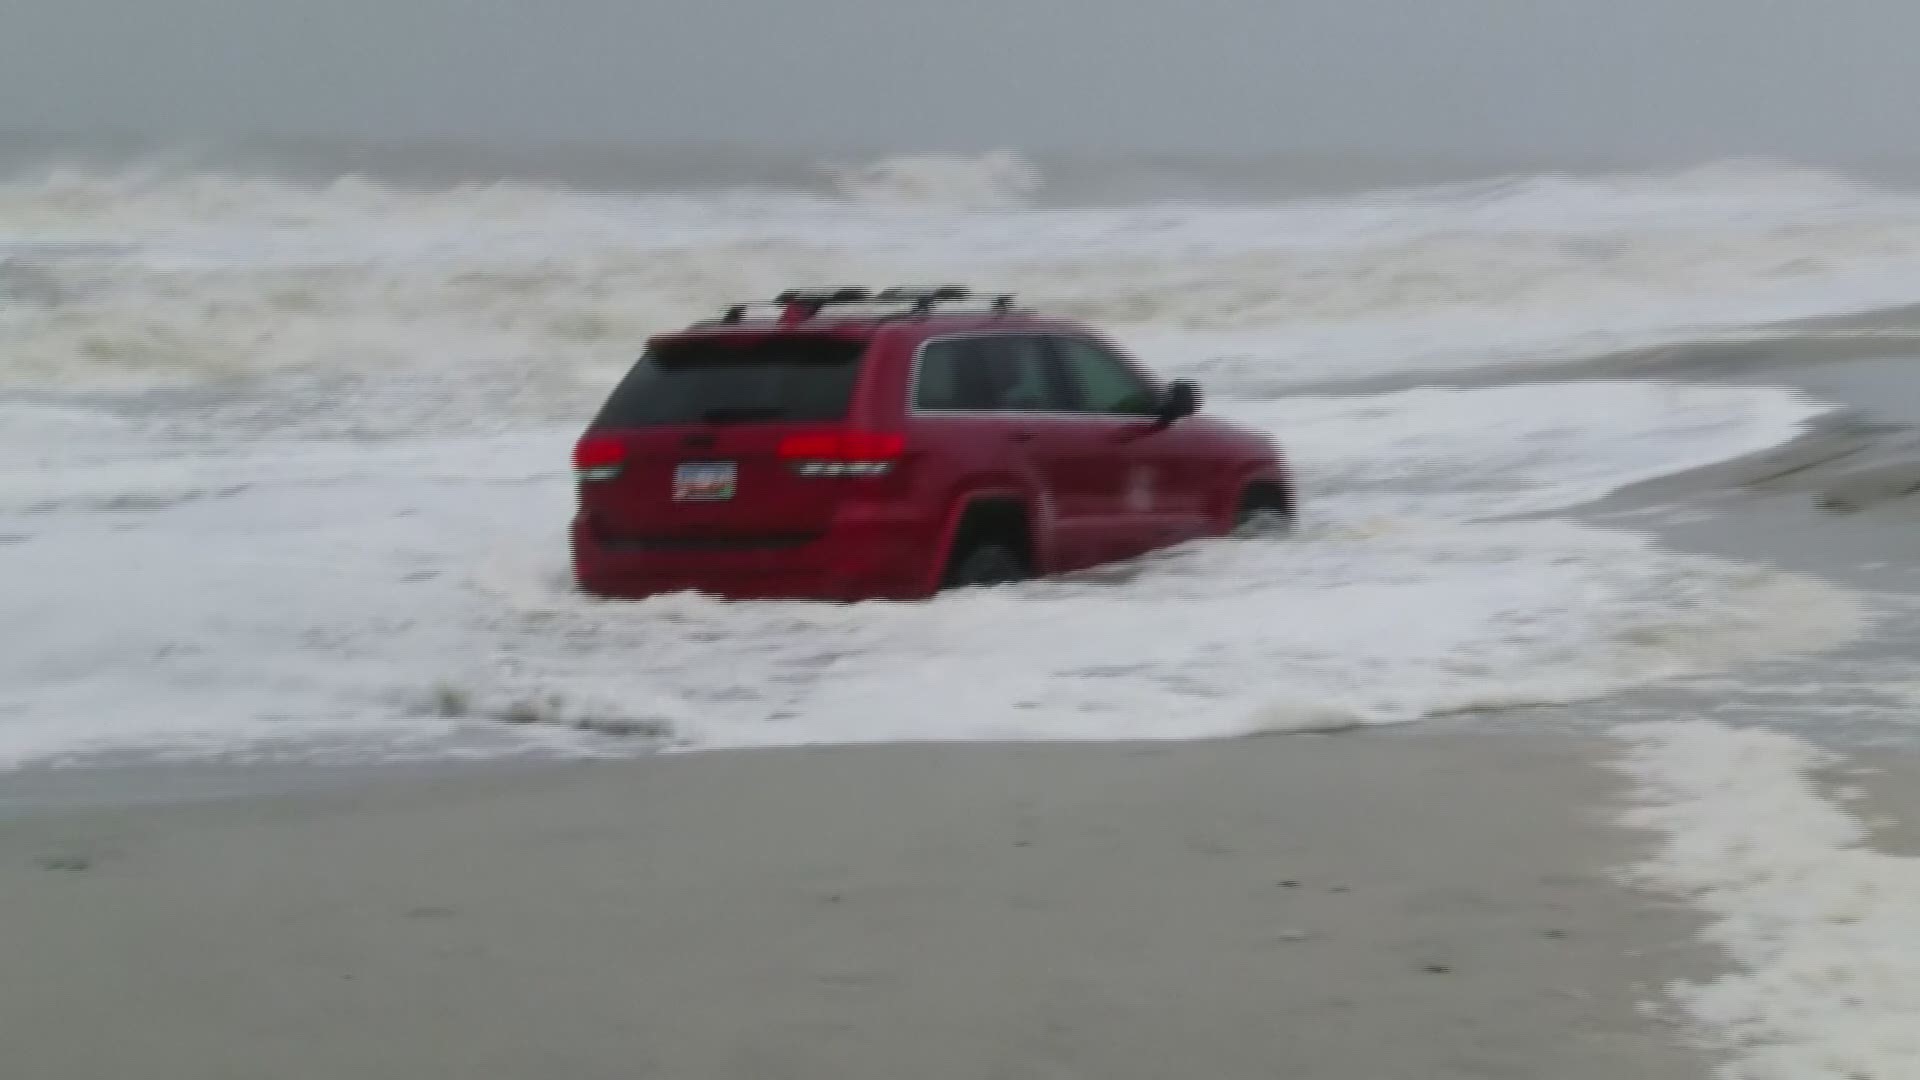 Police in Myrtle Beach said a driver got stuck on the beach at Myrtle Beach ahead of Hurricane Dorian in South Carolina. The SUV was then abandoned on the beach as high tide came ashore.